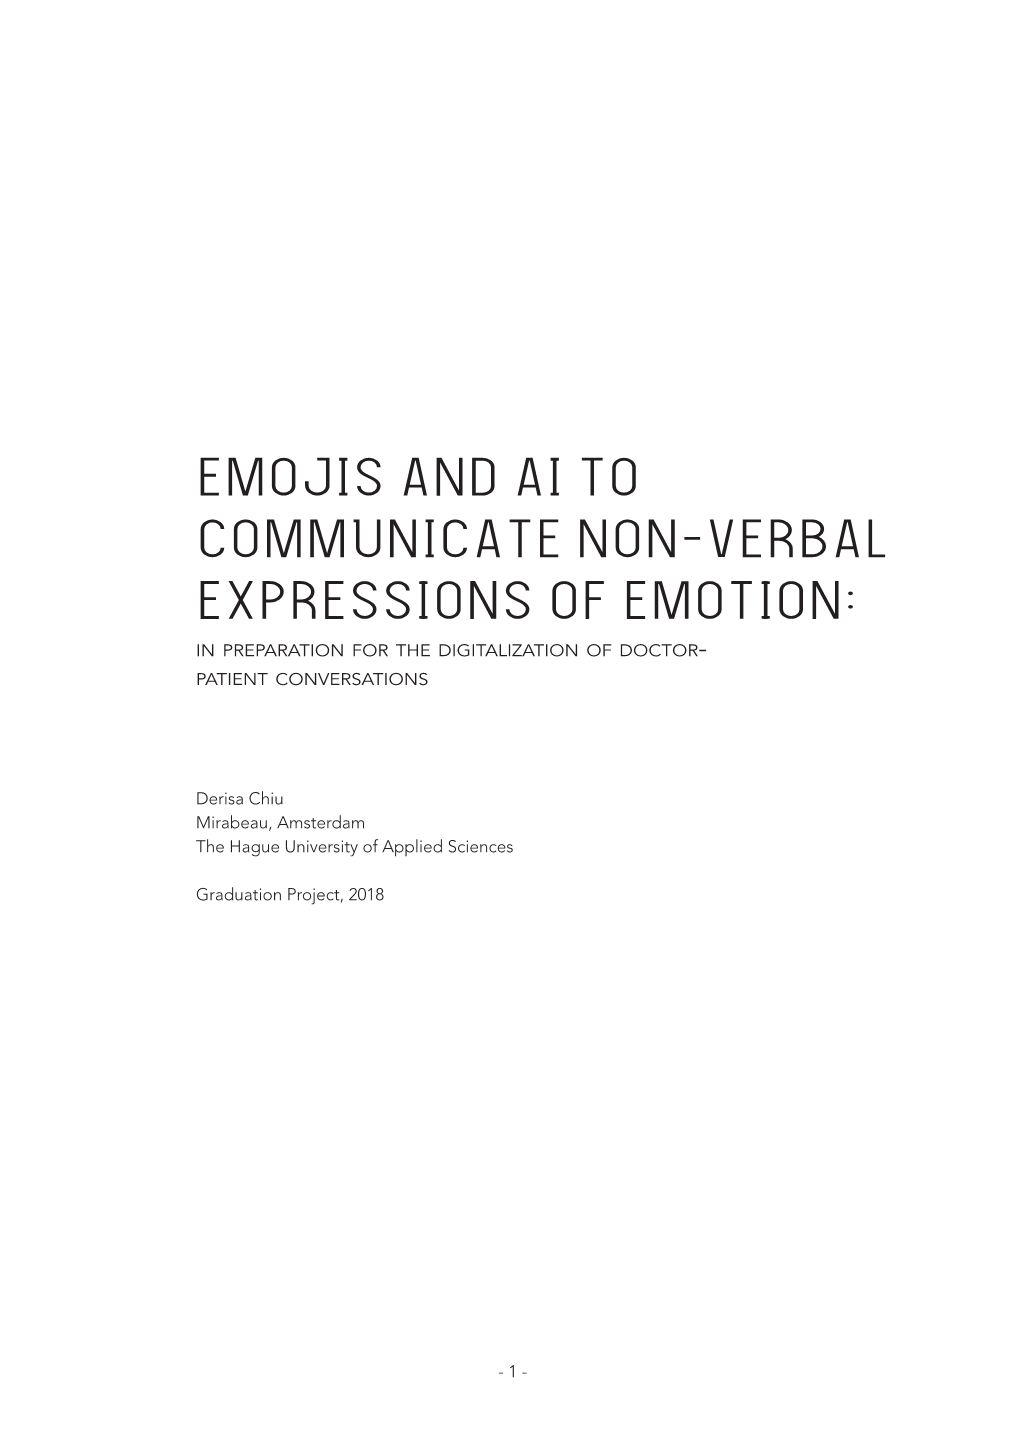 EMOJIS and AI to COMMUNICATE NON-VERBAL EXPRESSIONS of EMOTION: in Preparation for the Digitalization of Doctor- Patient Conversations